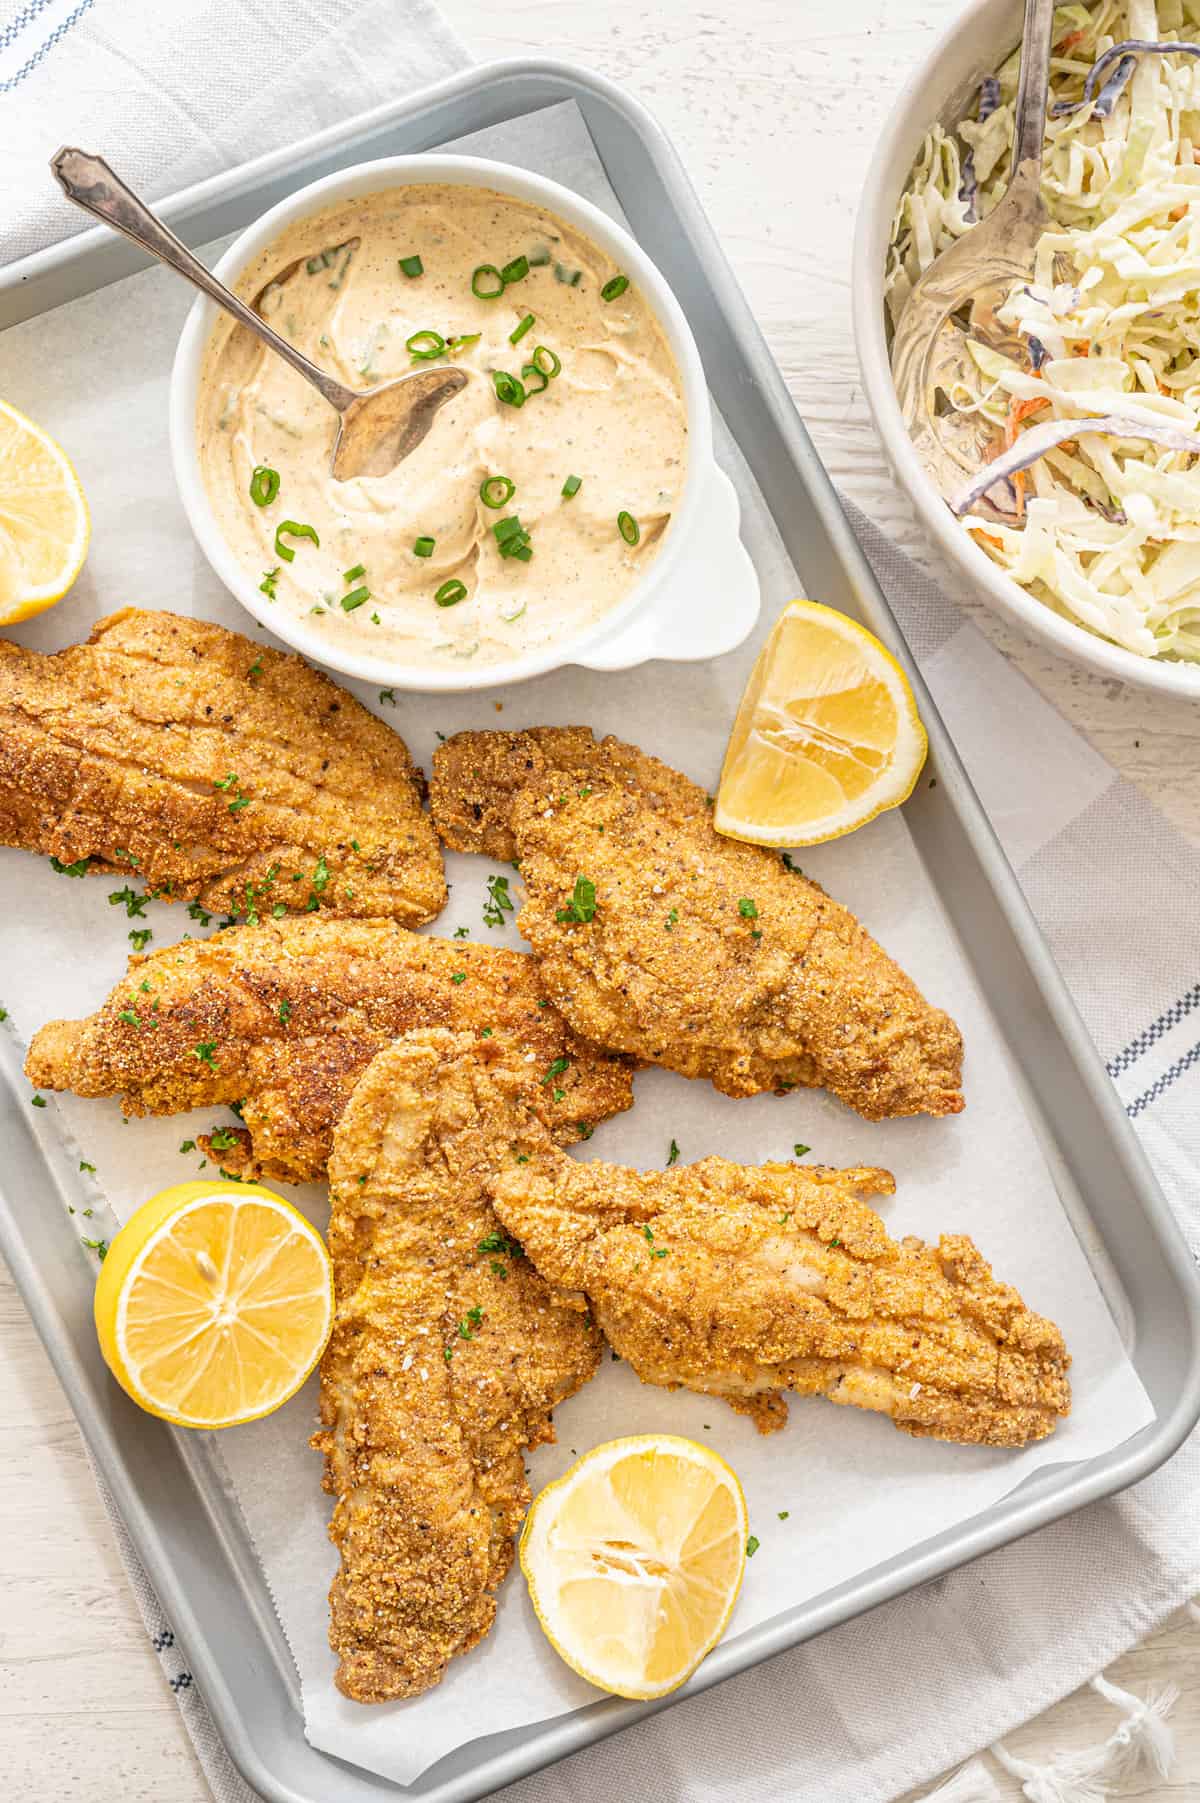 Fried catfish filets on a sheet pan with remoulade sauce and coleslaw on the side.